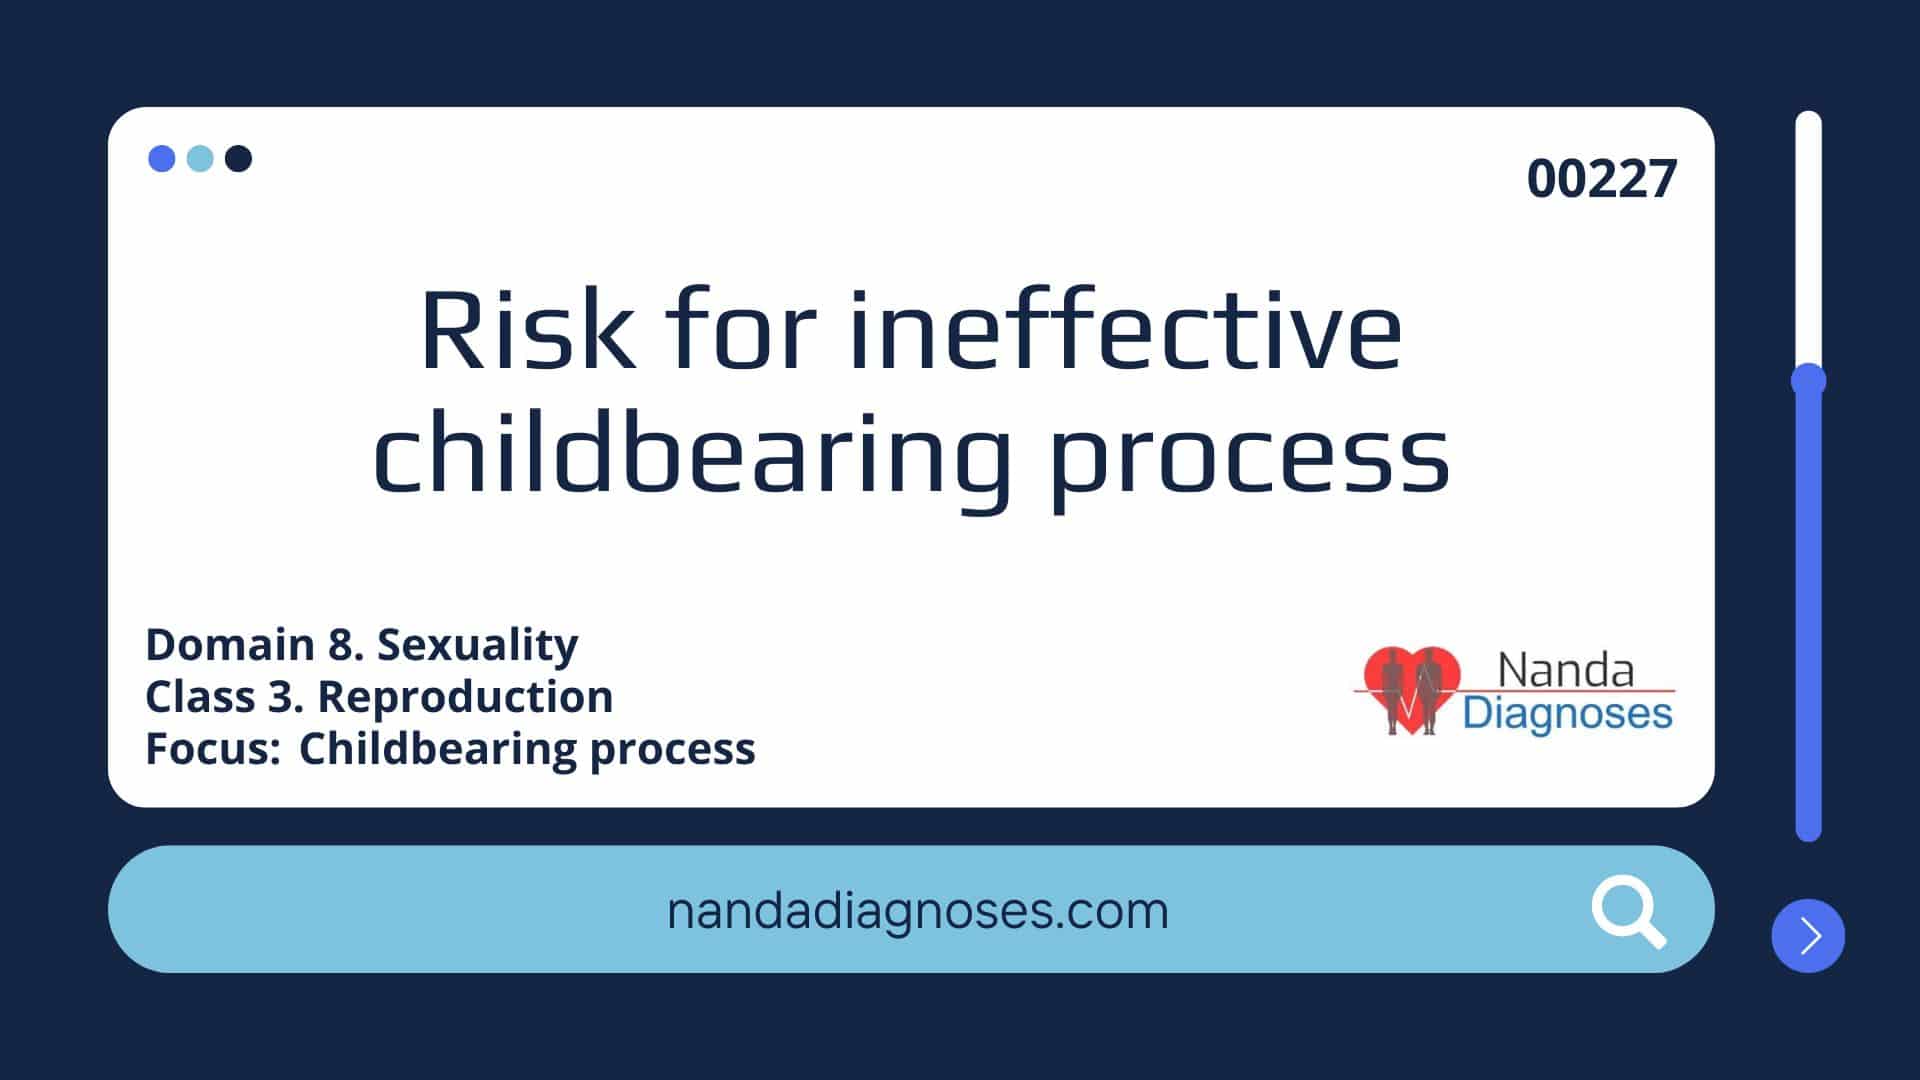 Nursing diagnosis Risk for ineffective childbearing process